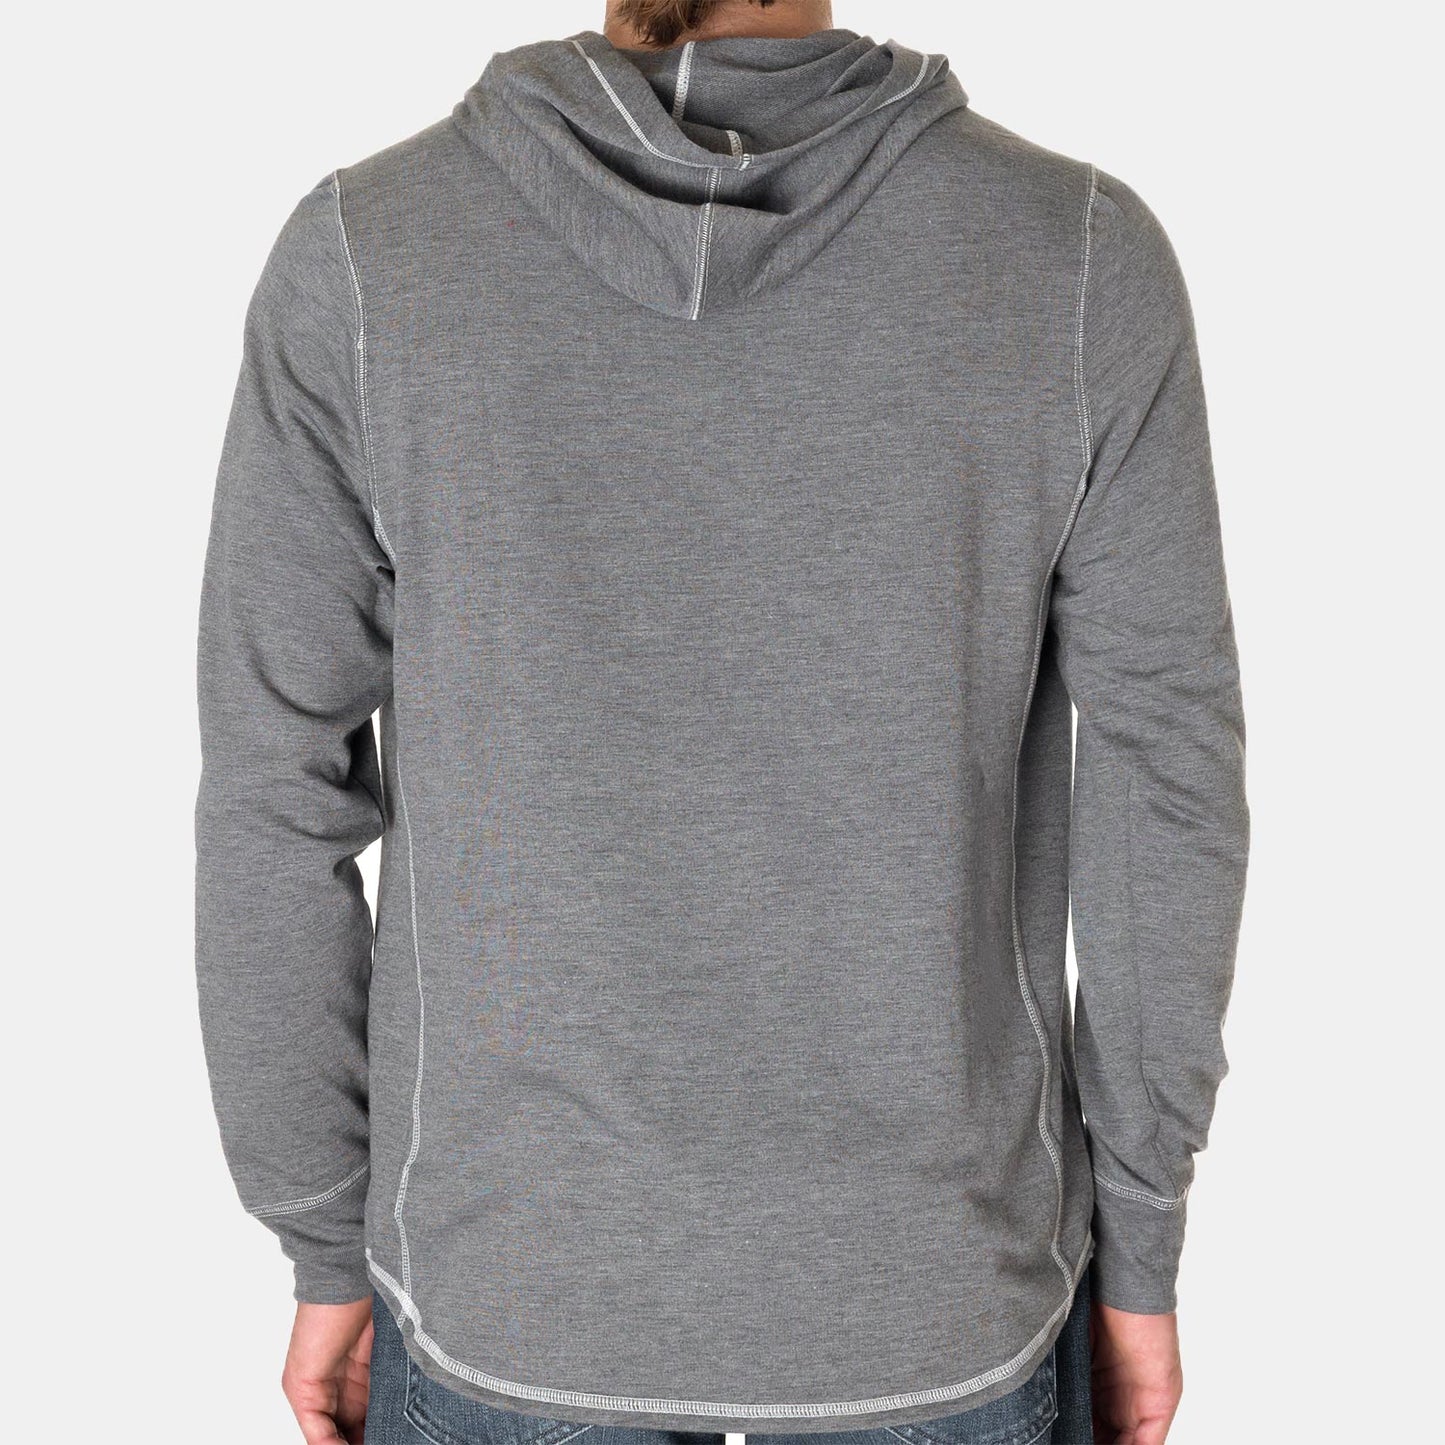 Toes on the Nose Super Soft Hoodie in Grey